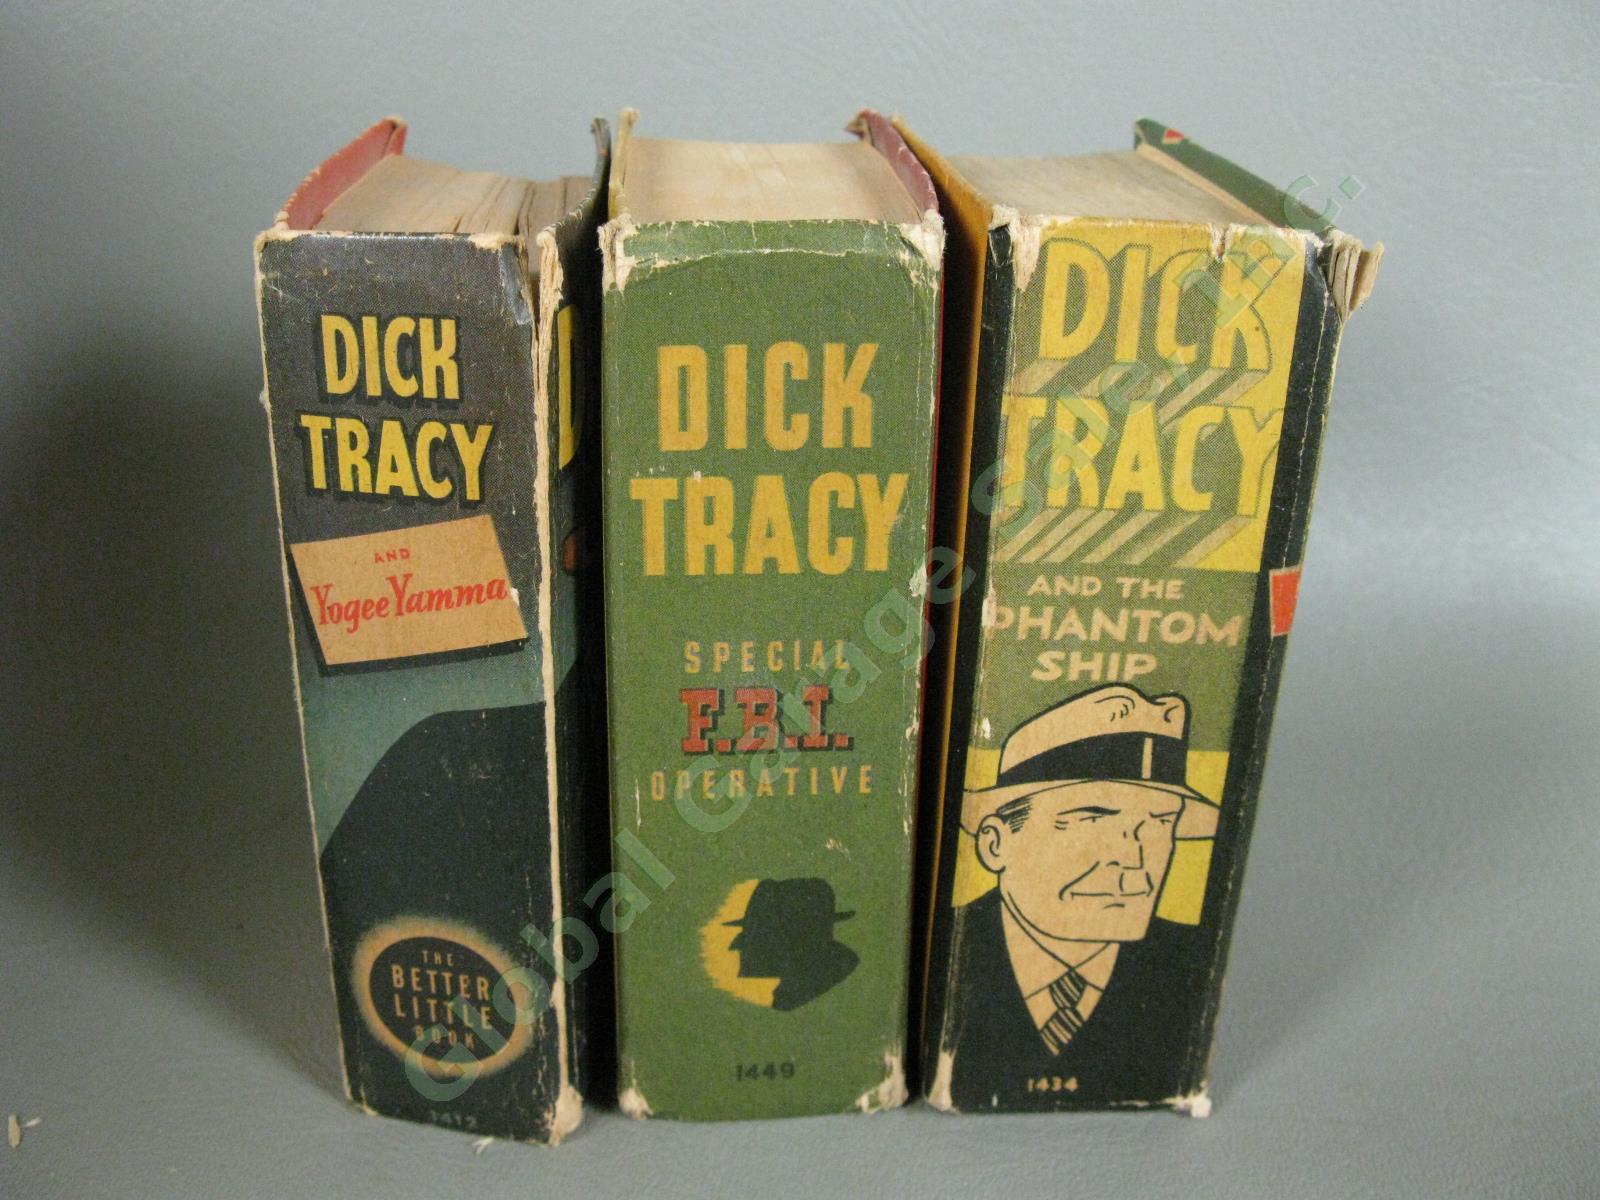 Vtg 14 Dick Tracy Big/Better Little Books Lot Penfield Mystery Voodoo Island +NR 19